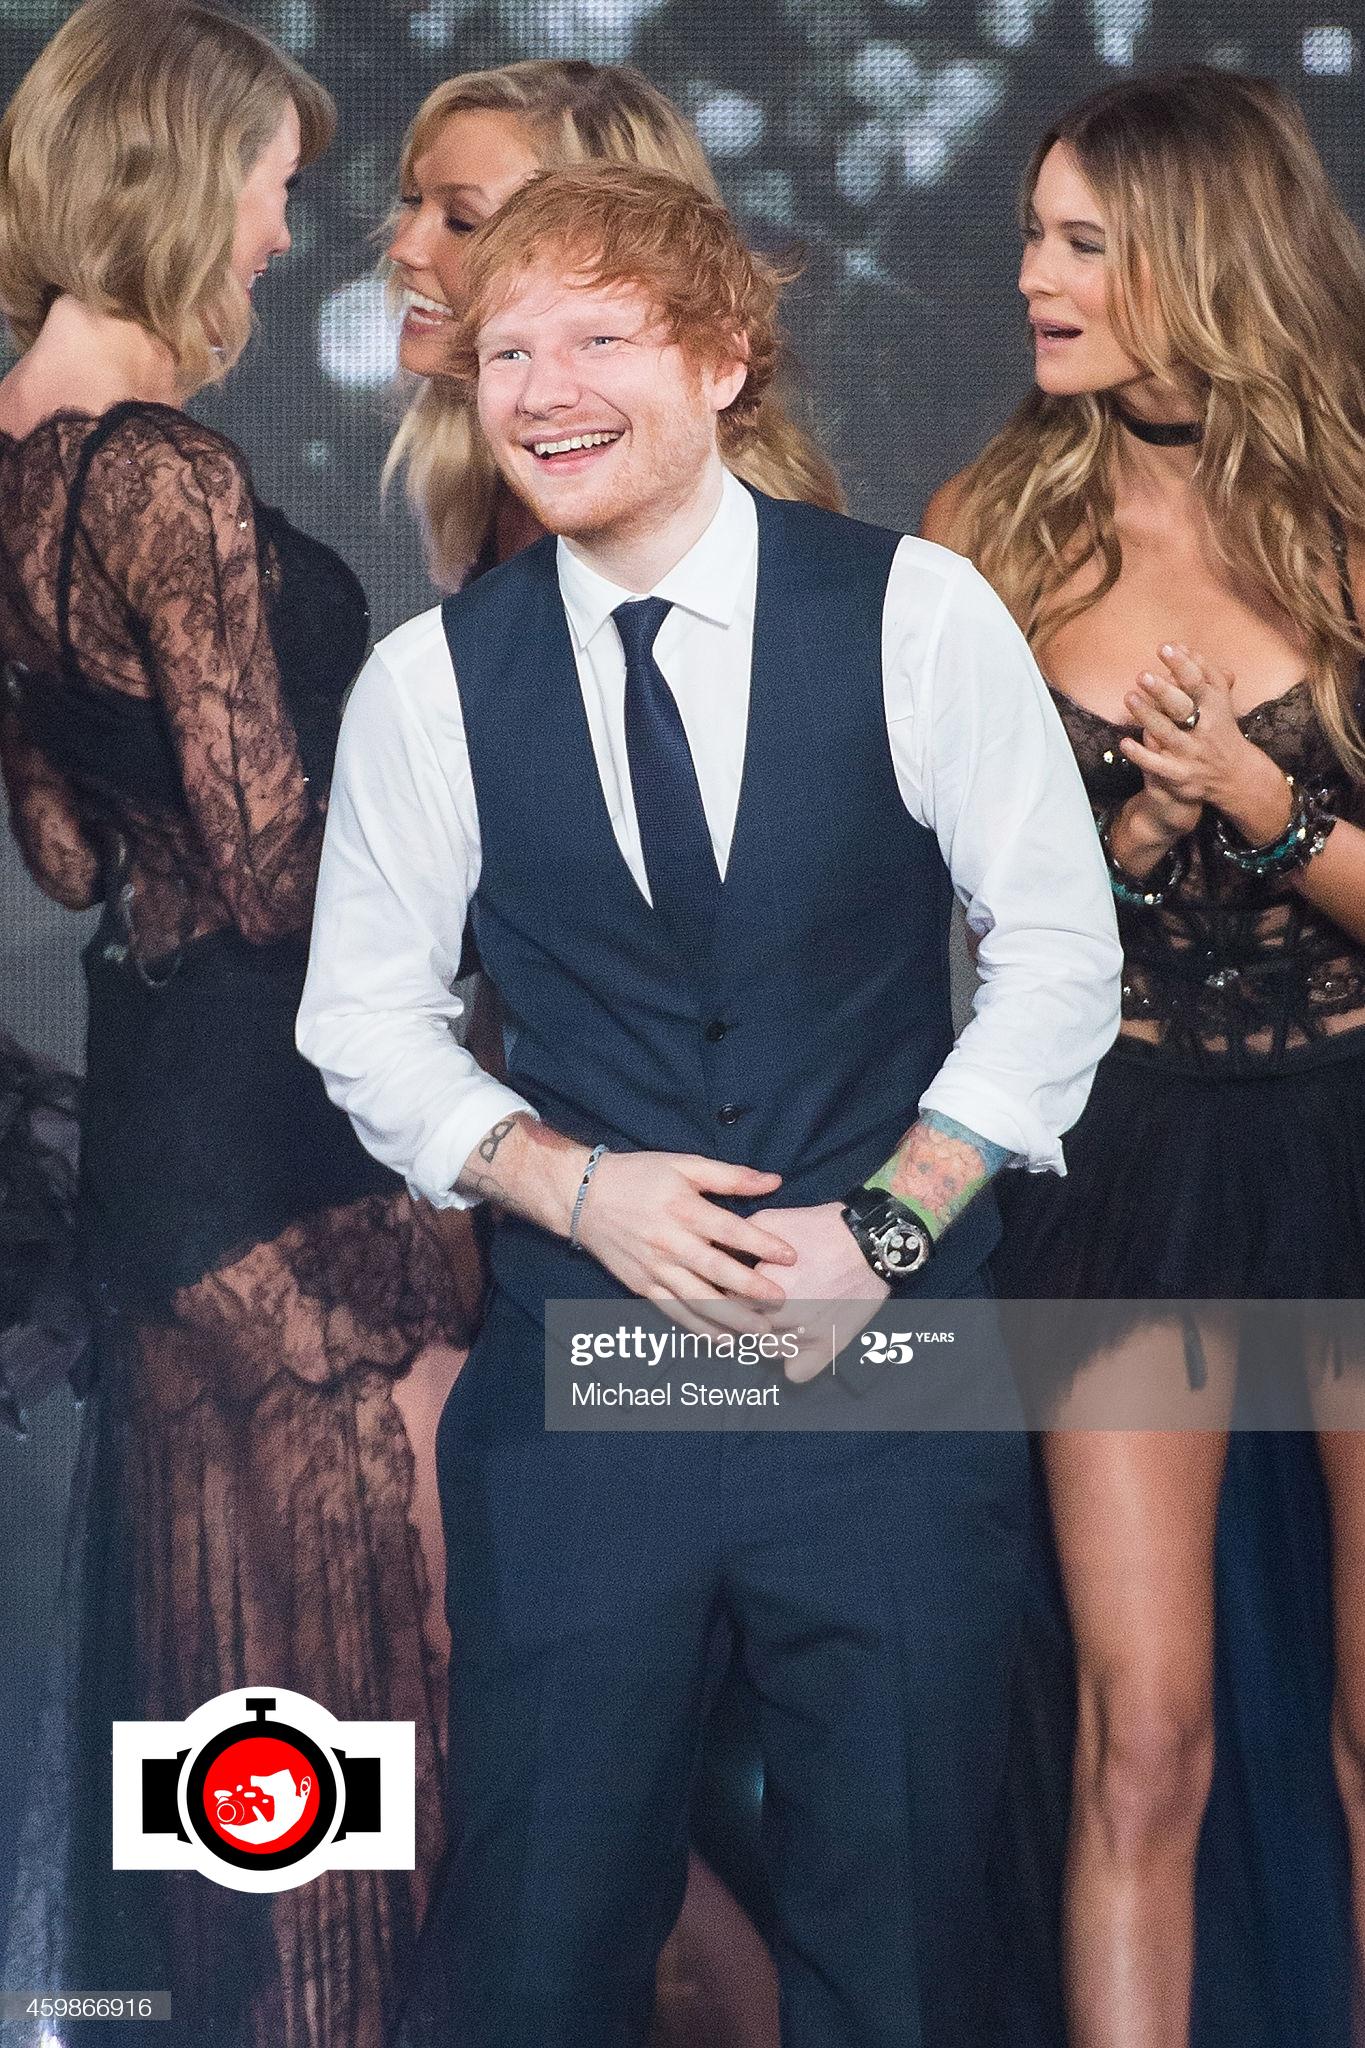 singer Ed Sheeran spotted wearing a Rolex 6239